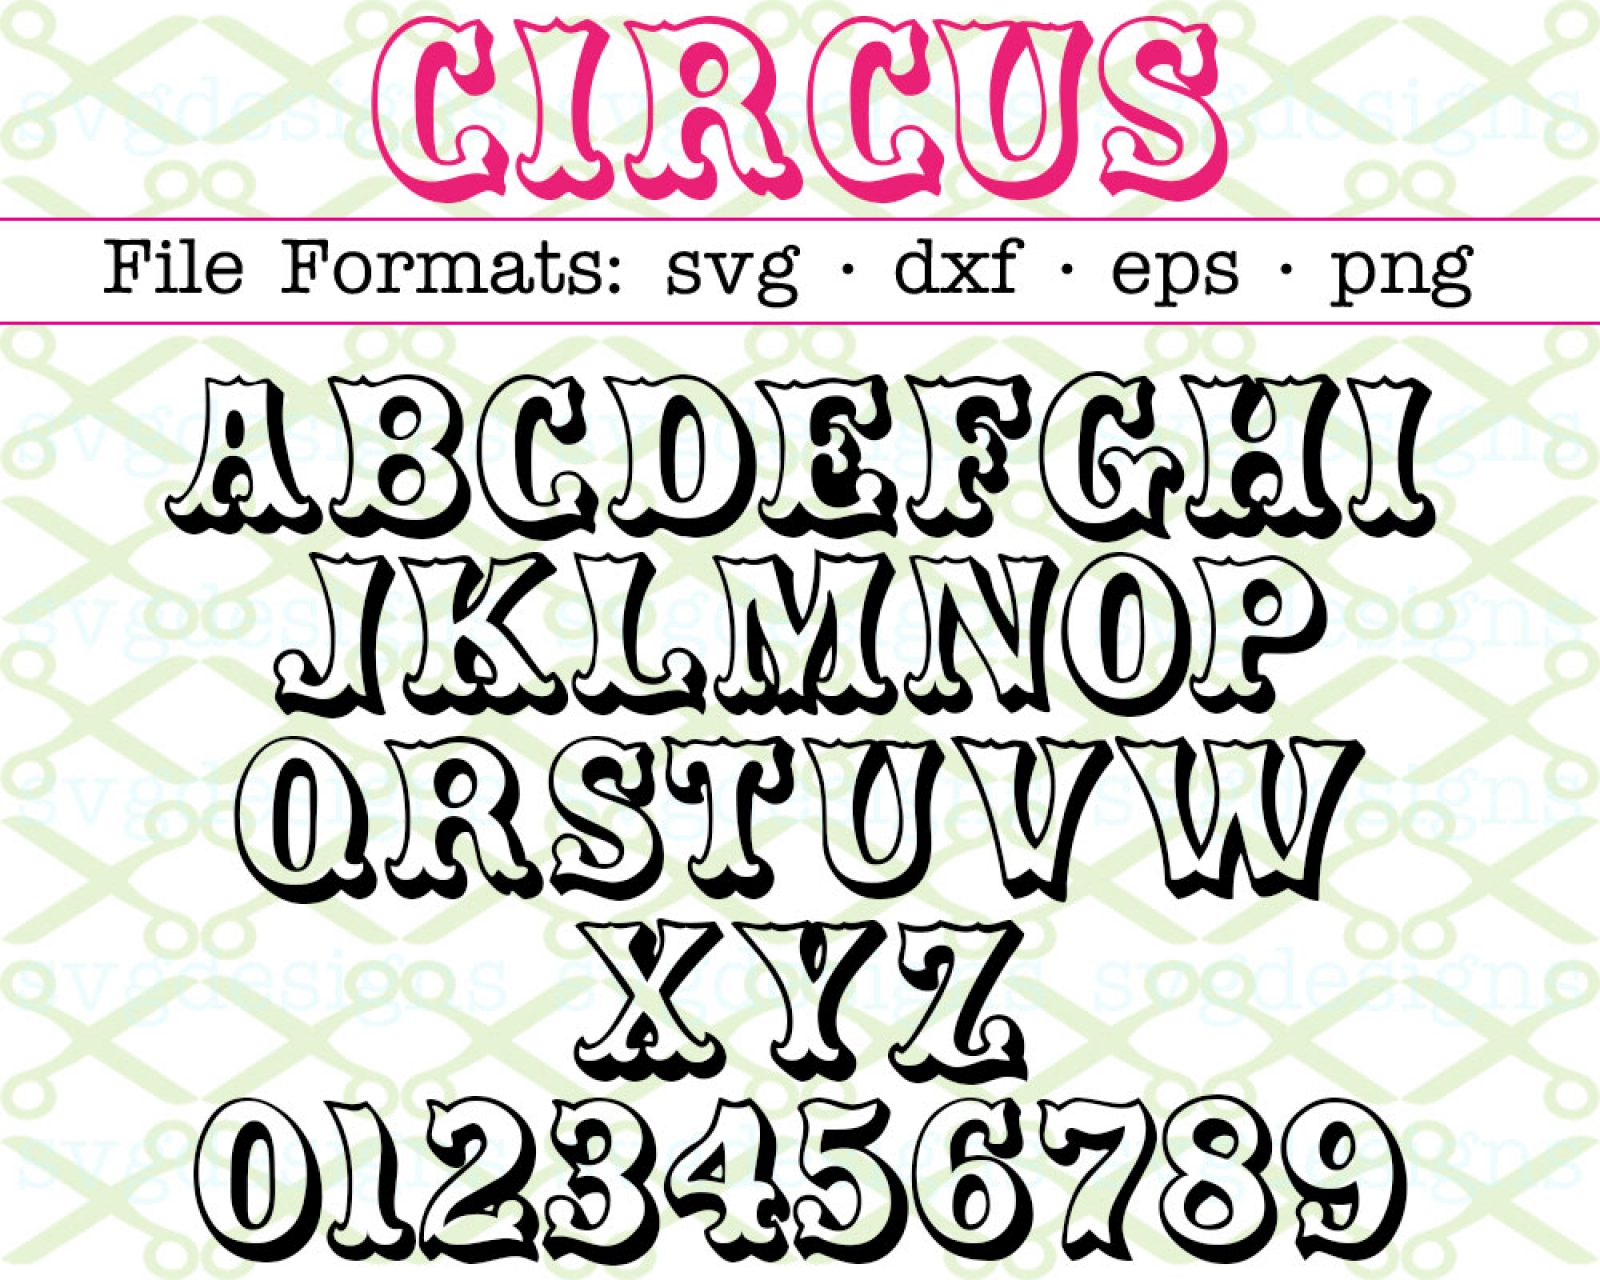 Download CIRCUS SVG FONT -Cricut & Silhouette Files SVG DXF EPS PNG ...